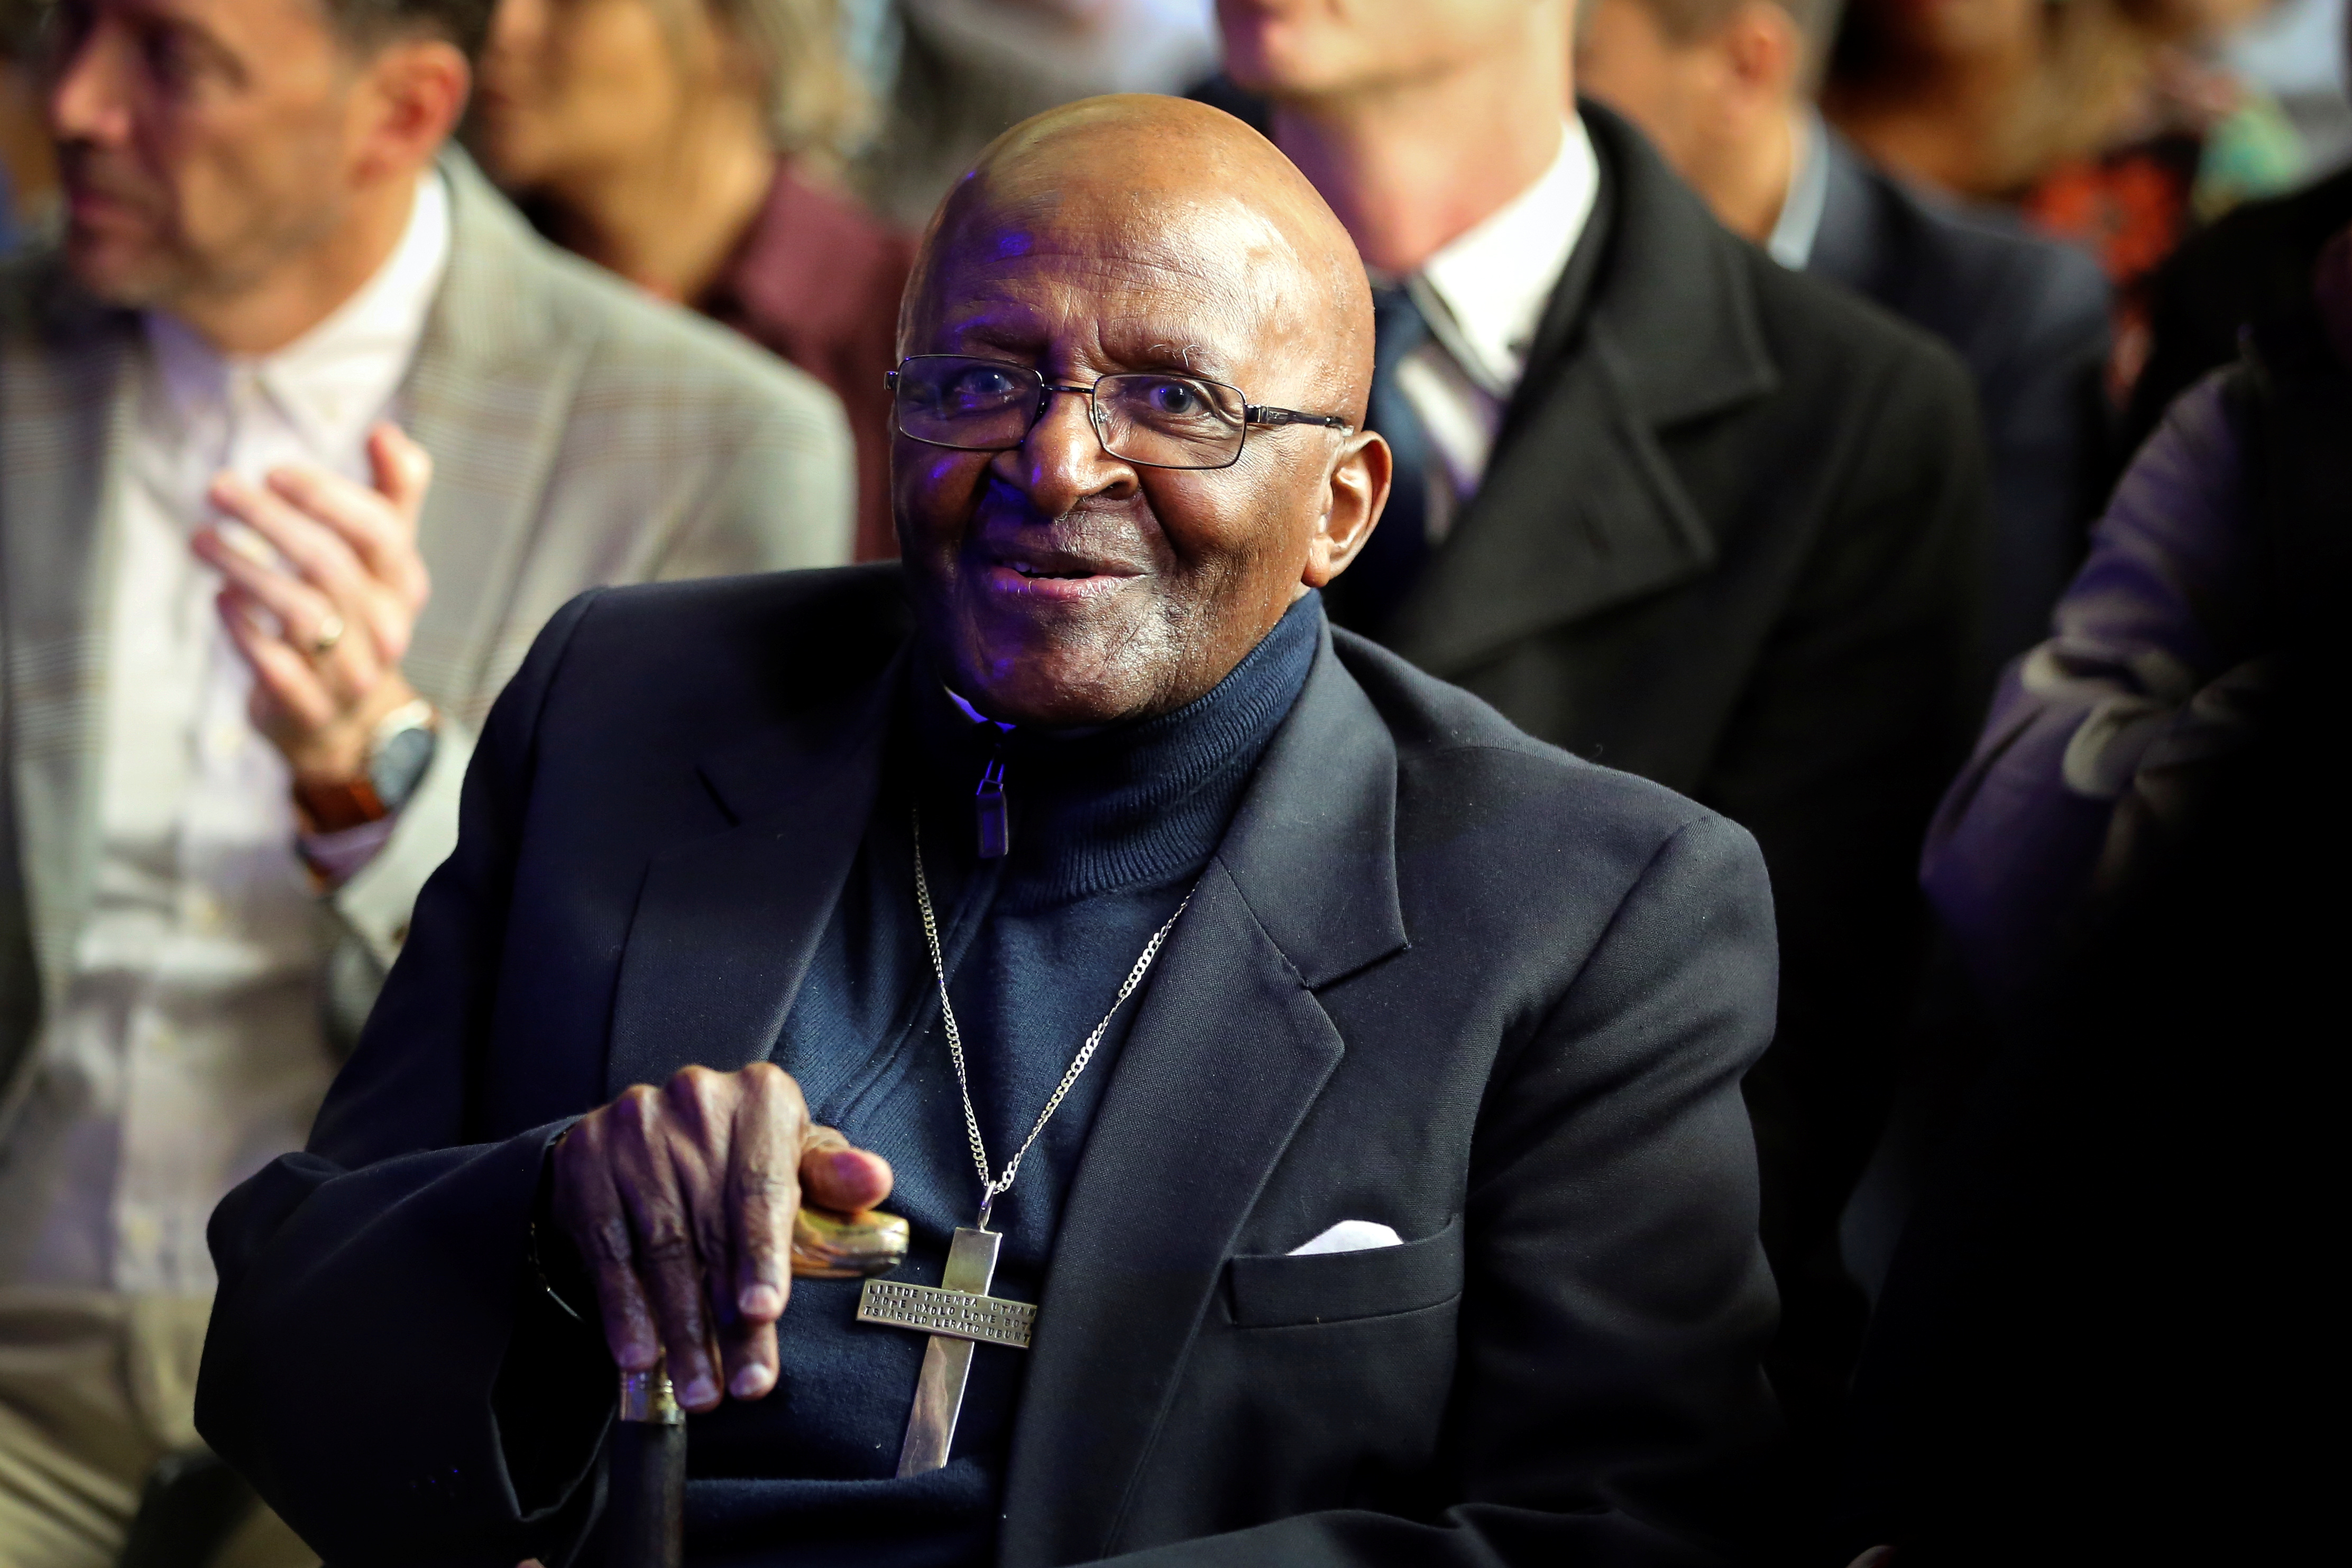 Archbishop Emeritus Desmond Tutu attends the unveiling ceremony of a statue of Nelson Mandela at the City Hall in Cape Town